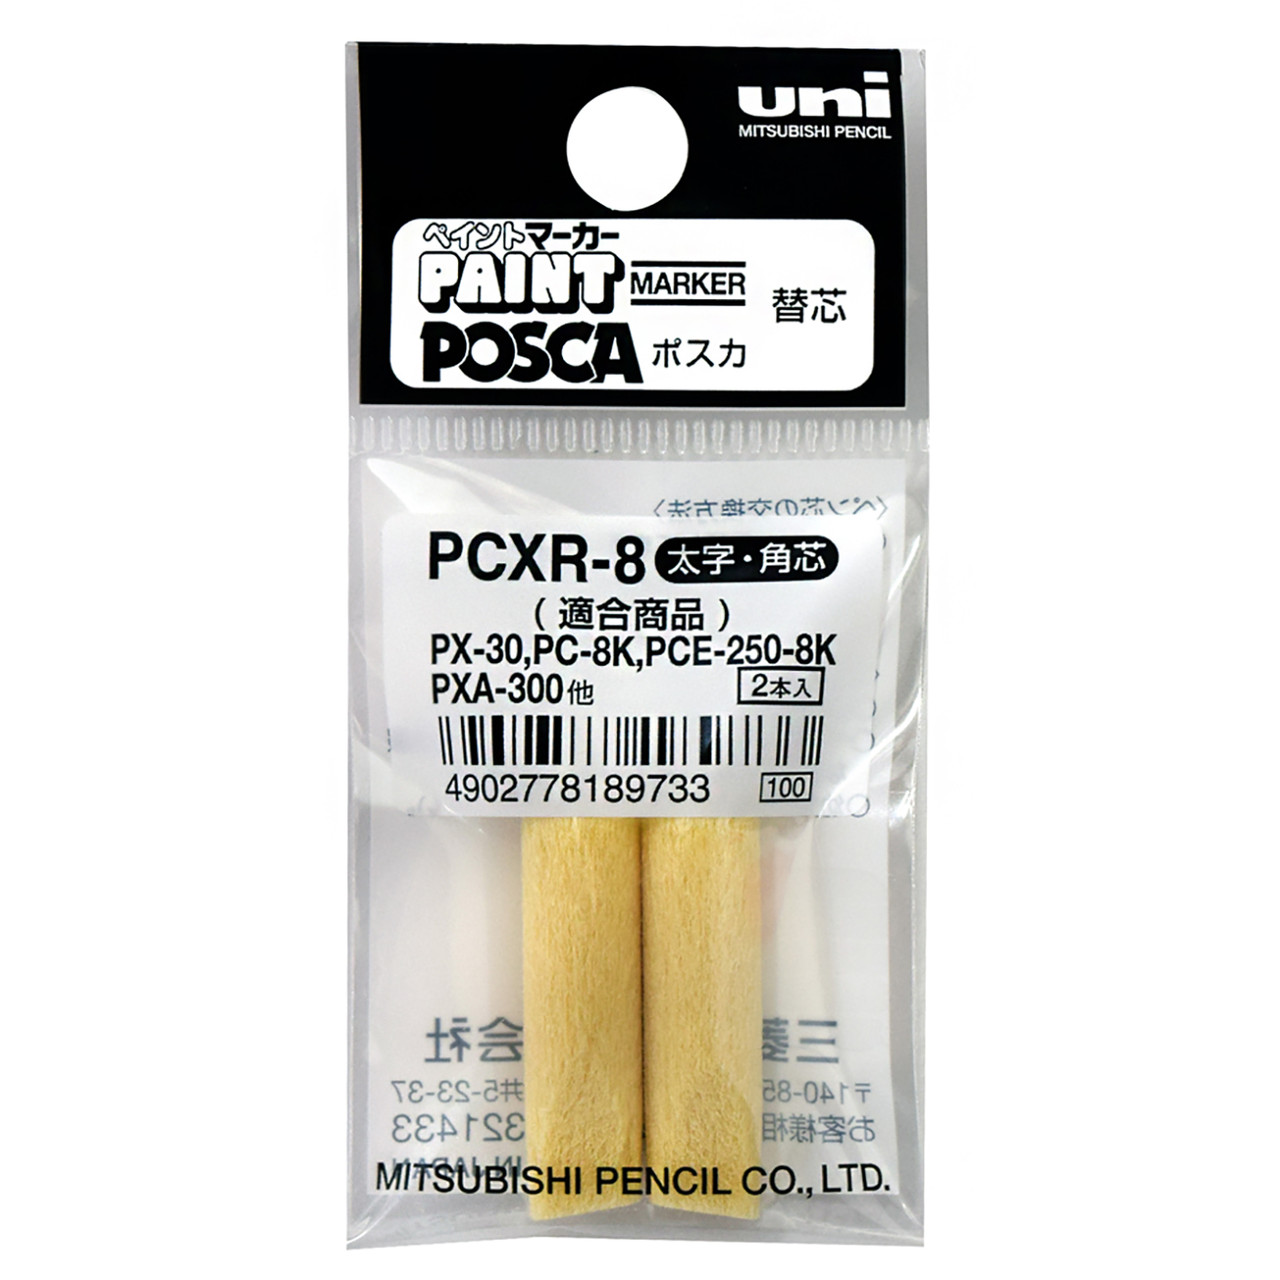 Replacement Tips for Posca PC-8K, Pack of 2 (PXR-8)